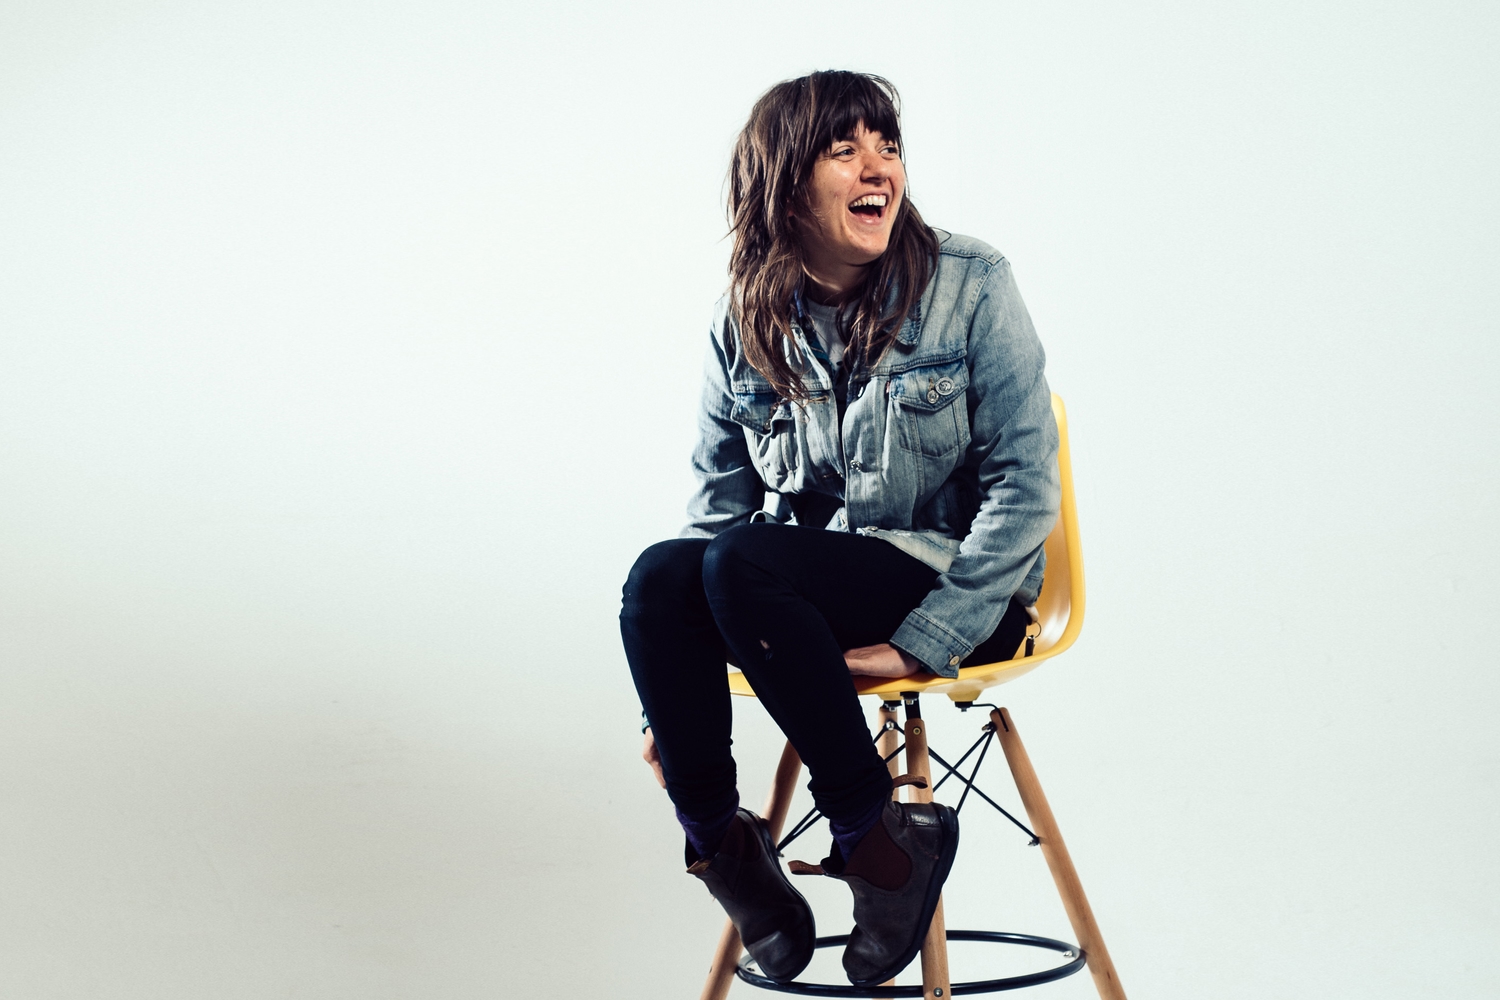 Courtney Barnett: “It’s like turning my brain inside out and showing it to everyone”